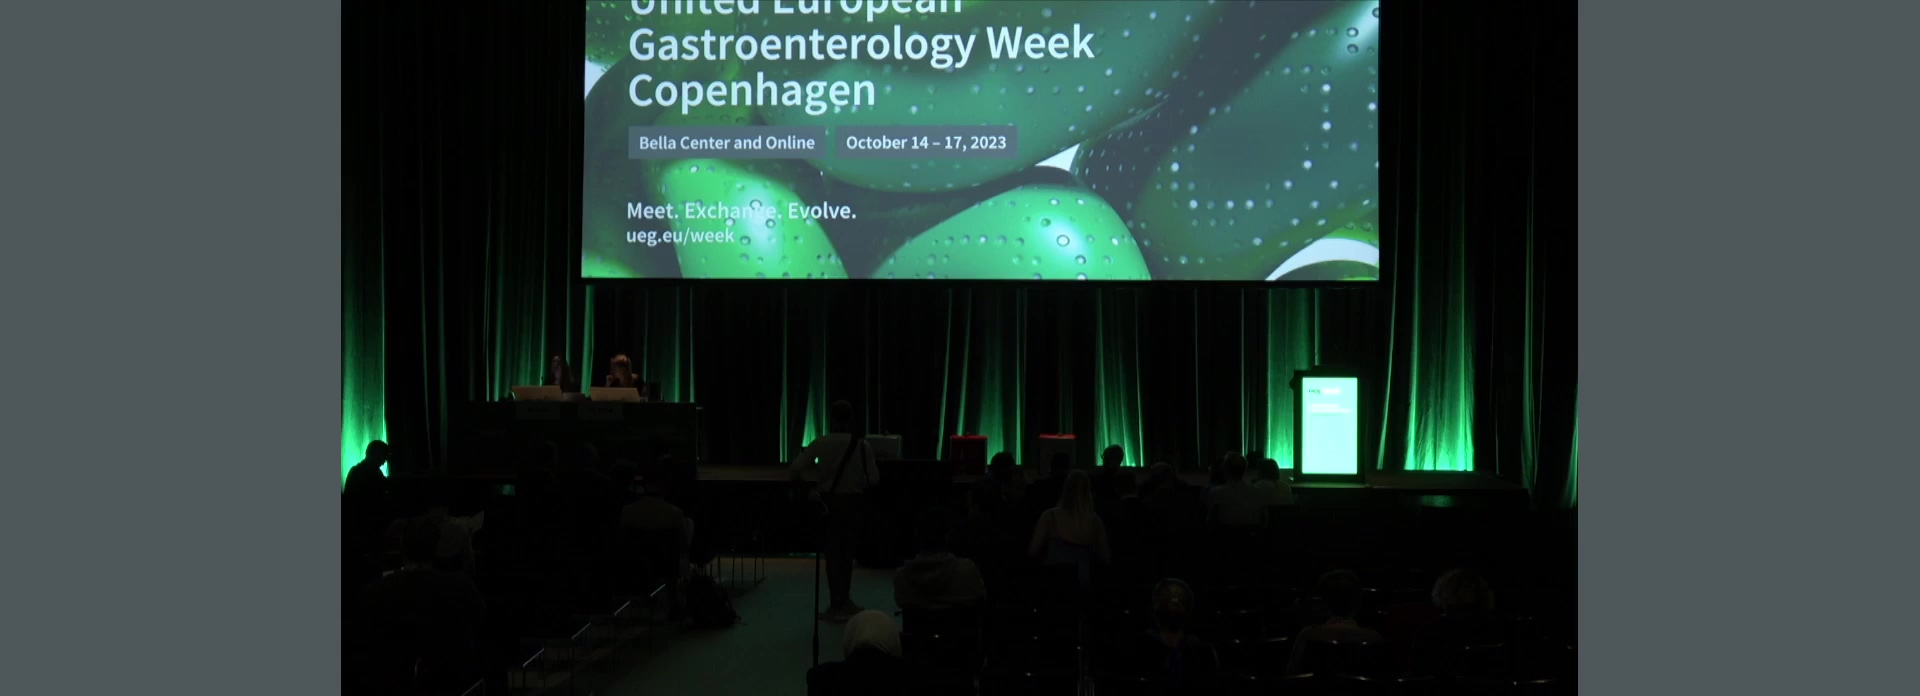 Introduction: Best of hepatology in UEG Journal